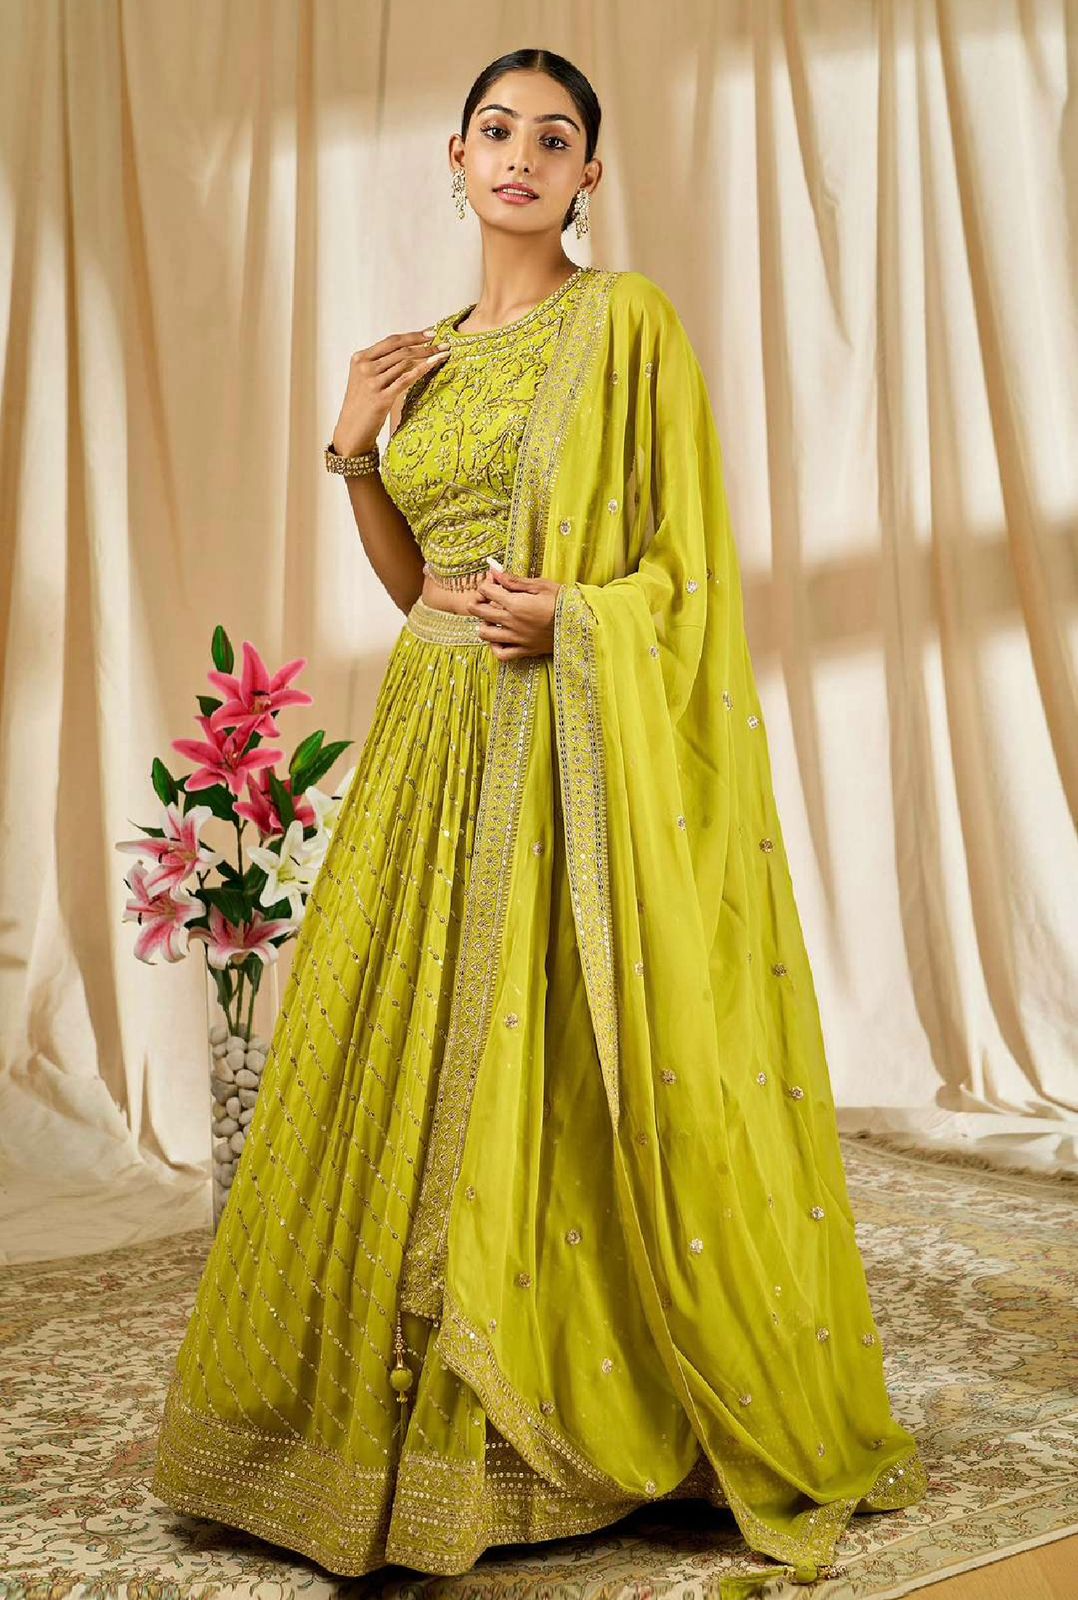 Buy Indo-Western Party Wear Lehenga Style Sarees Hindu Wedding Clothing  Online for Women in Malaysia